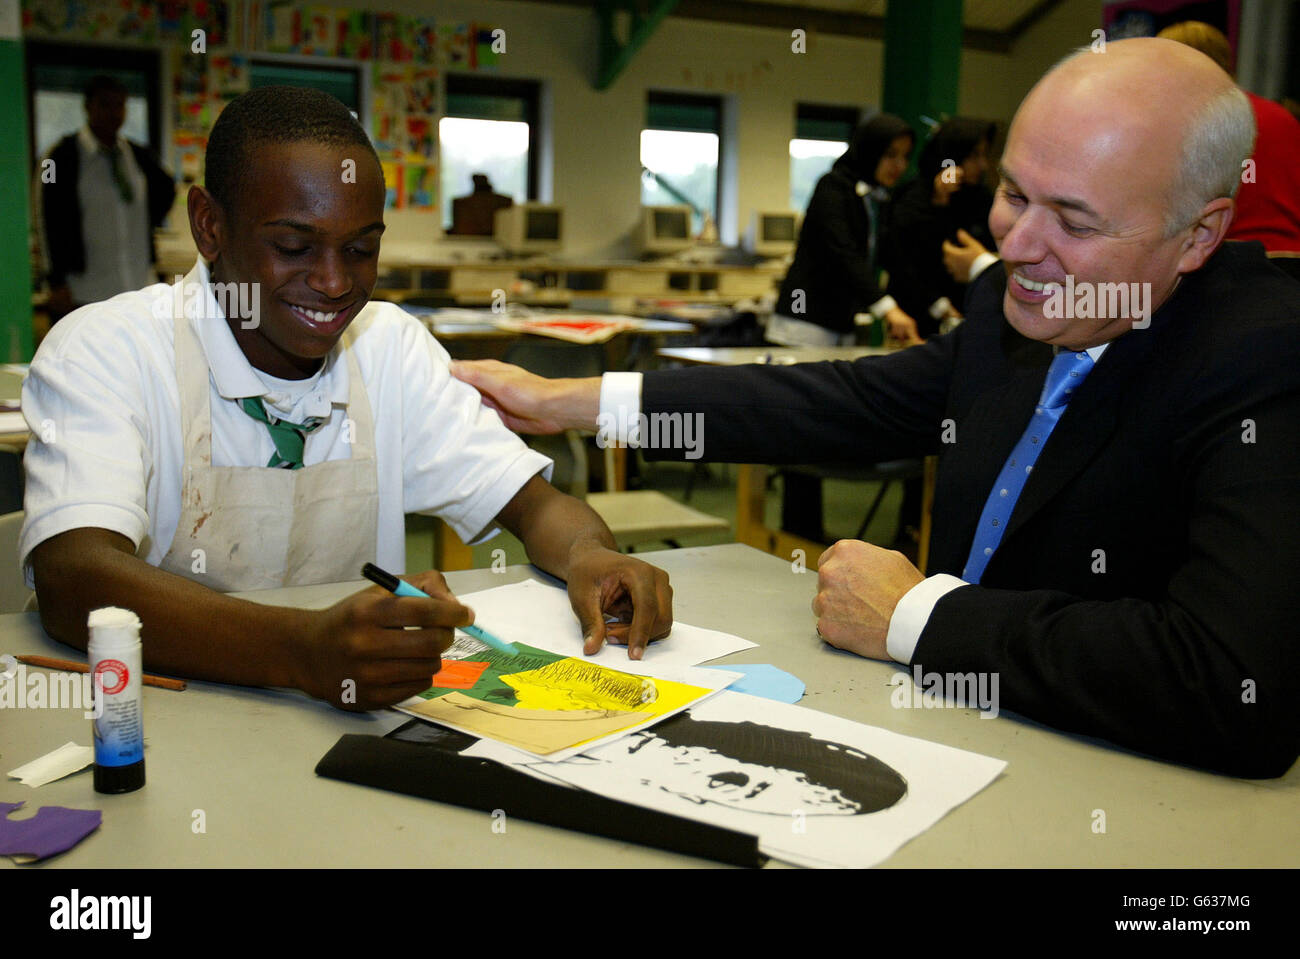 Conservative Party leader, Iain Duncan Smith, meets pupils at Ducie HIgh school in Manchester, as he kicks off a national tour to underline his efforts to make reform of the public services the party's top priority. * The tour will take in a total of 17 locations in England, Wales and Scotland over the next three weeks. Stock Photo